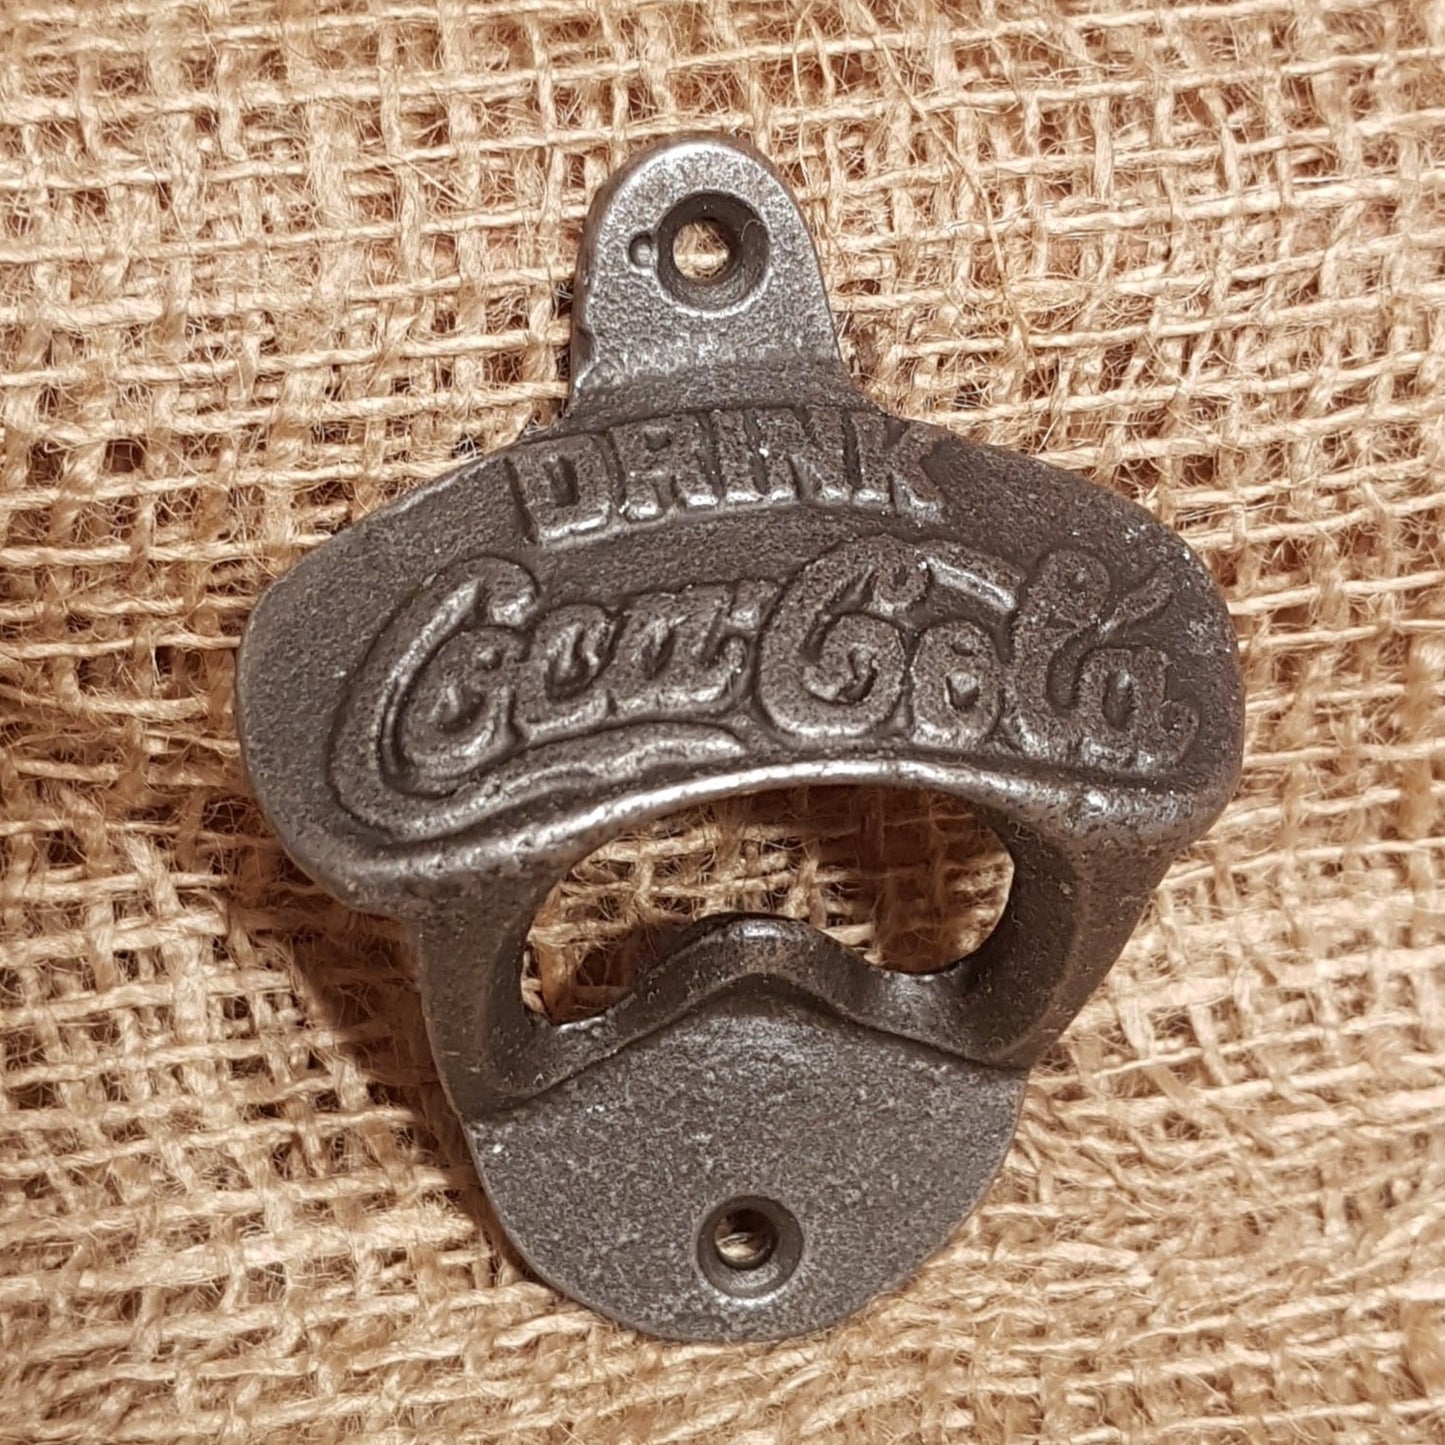 Coca Cola - Bottle Opener - Spearhead Collection - Bottle Openers - Bottle Openers, Coca-Cola, Gift Ideas